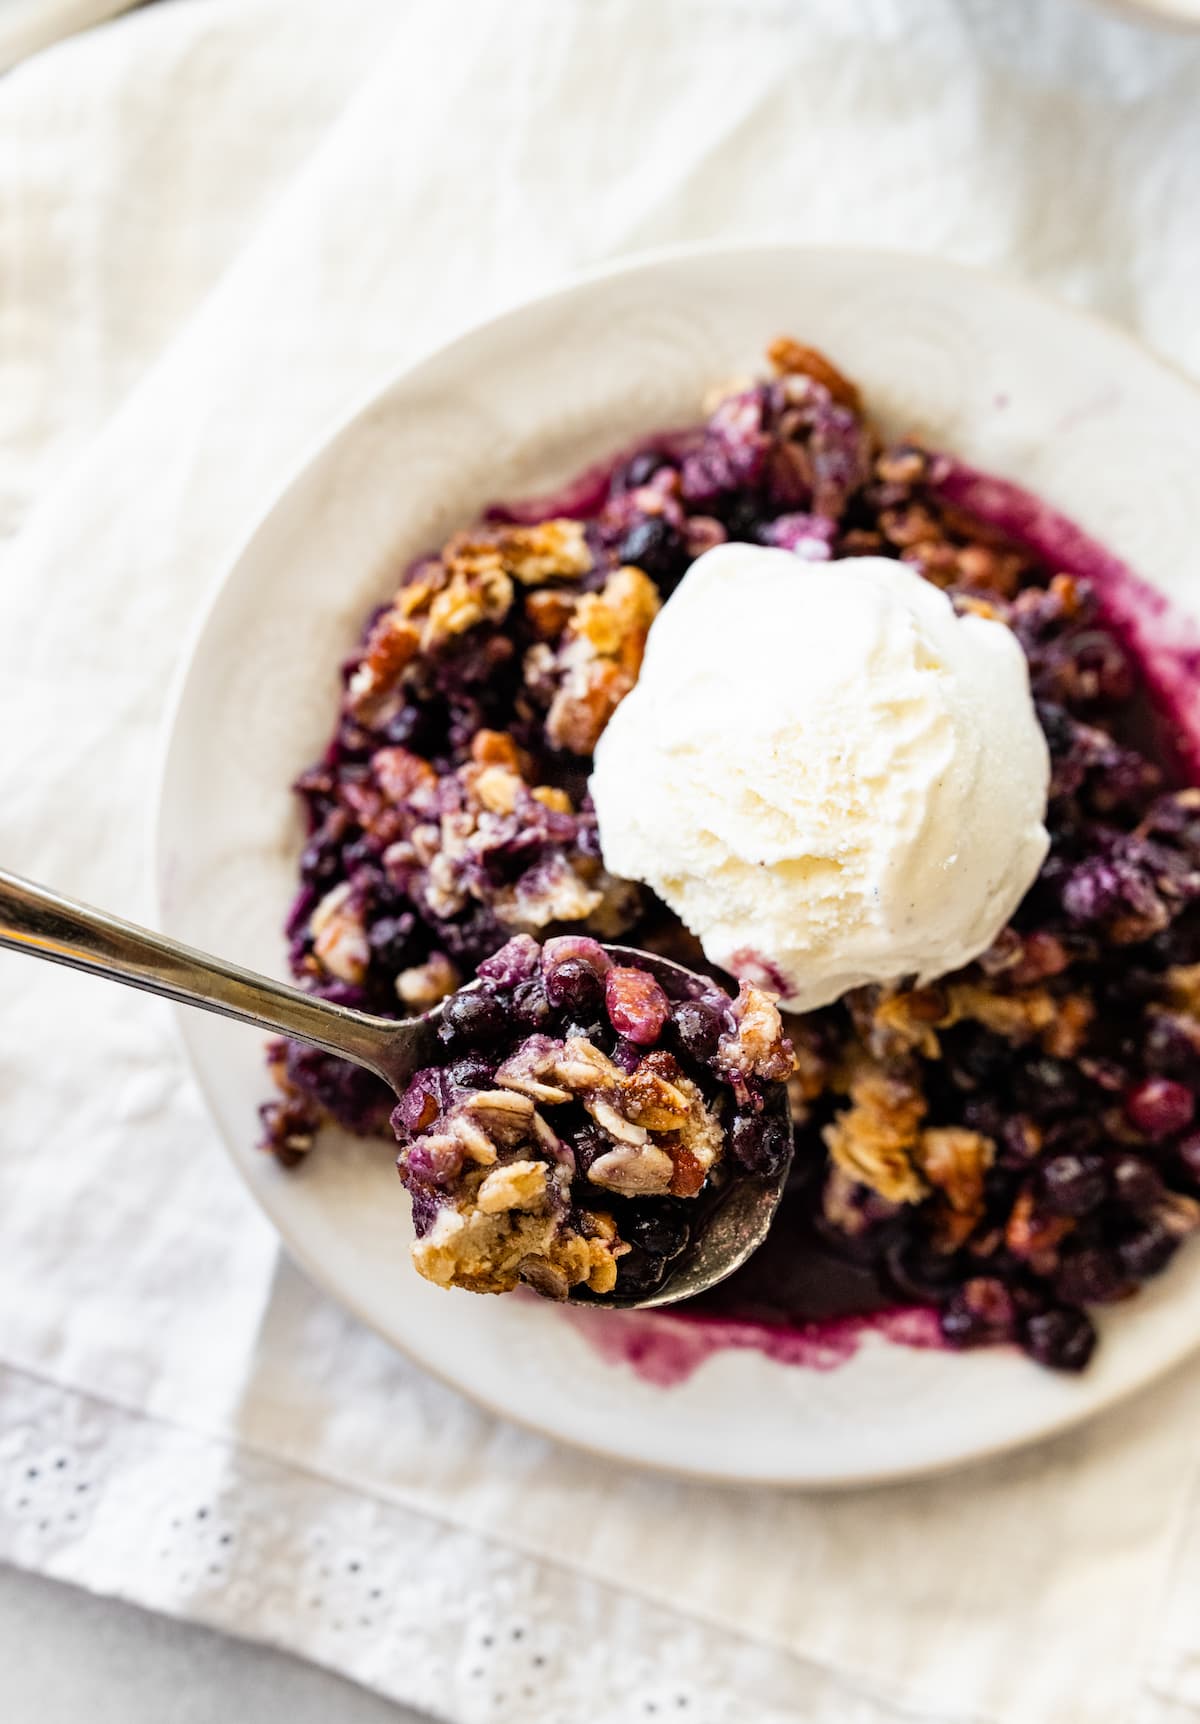 A metal spoon holding a bite size of the blueberry crumble over a small bowl.